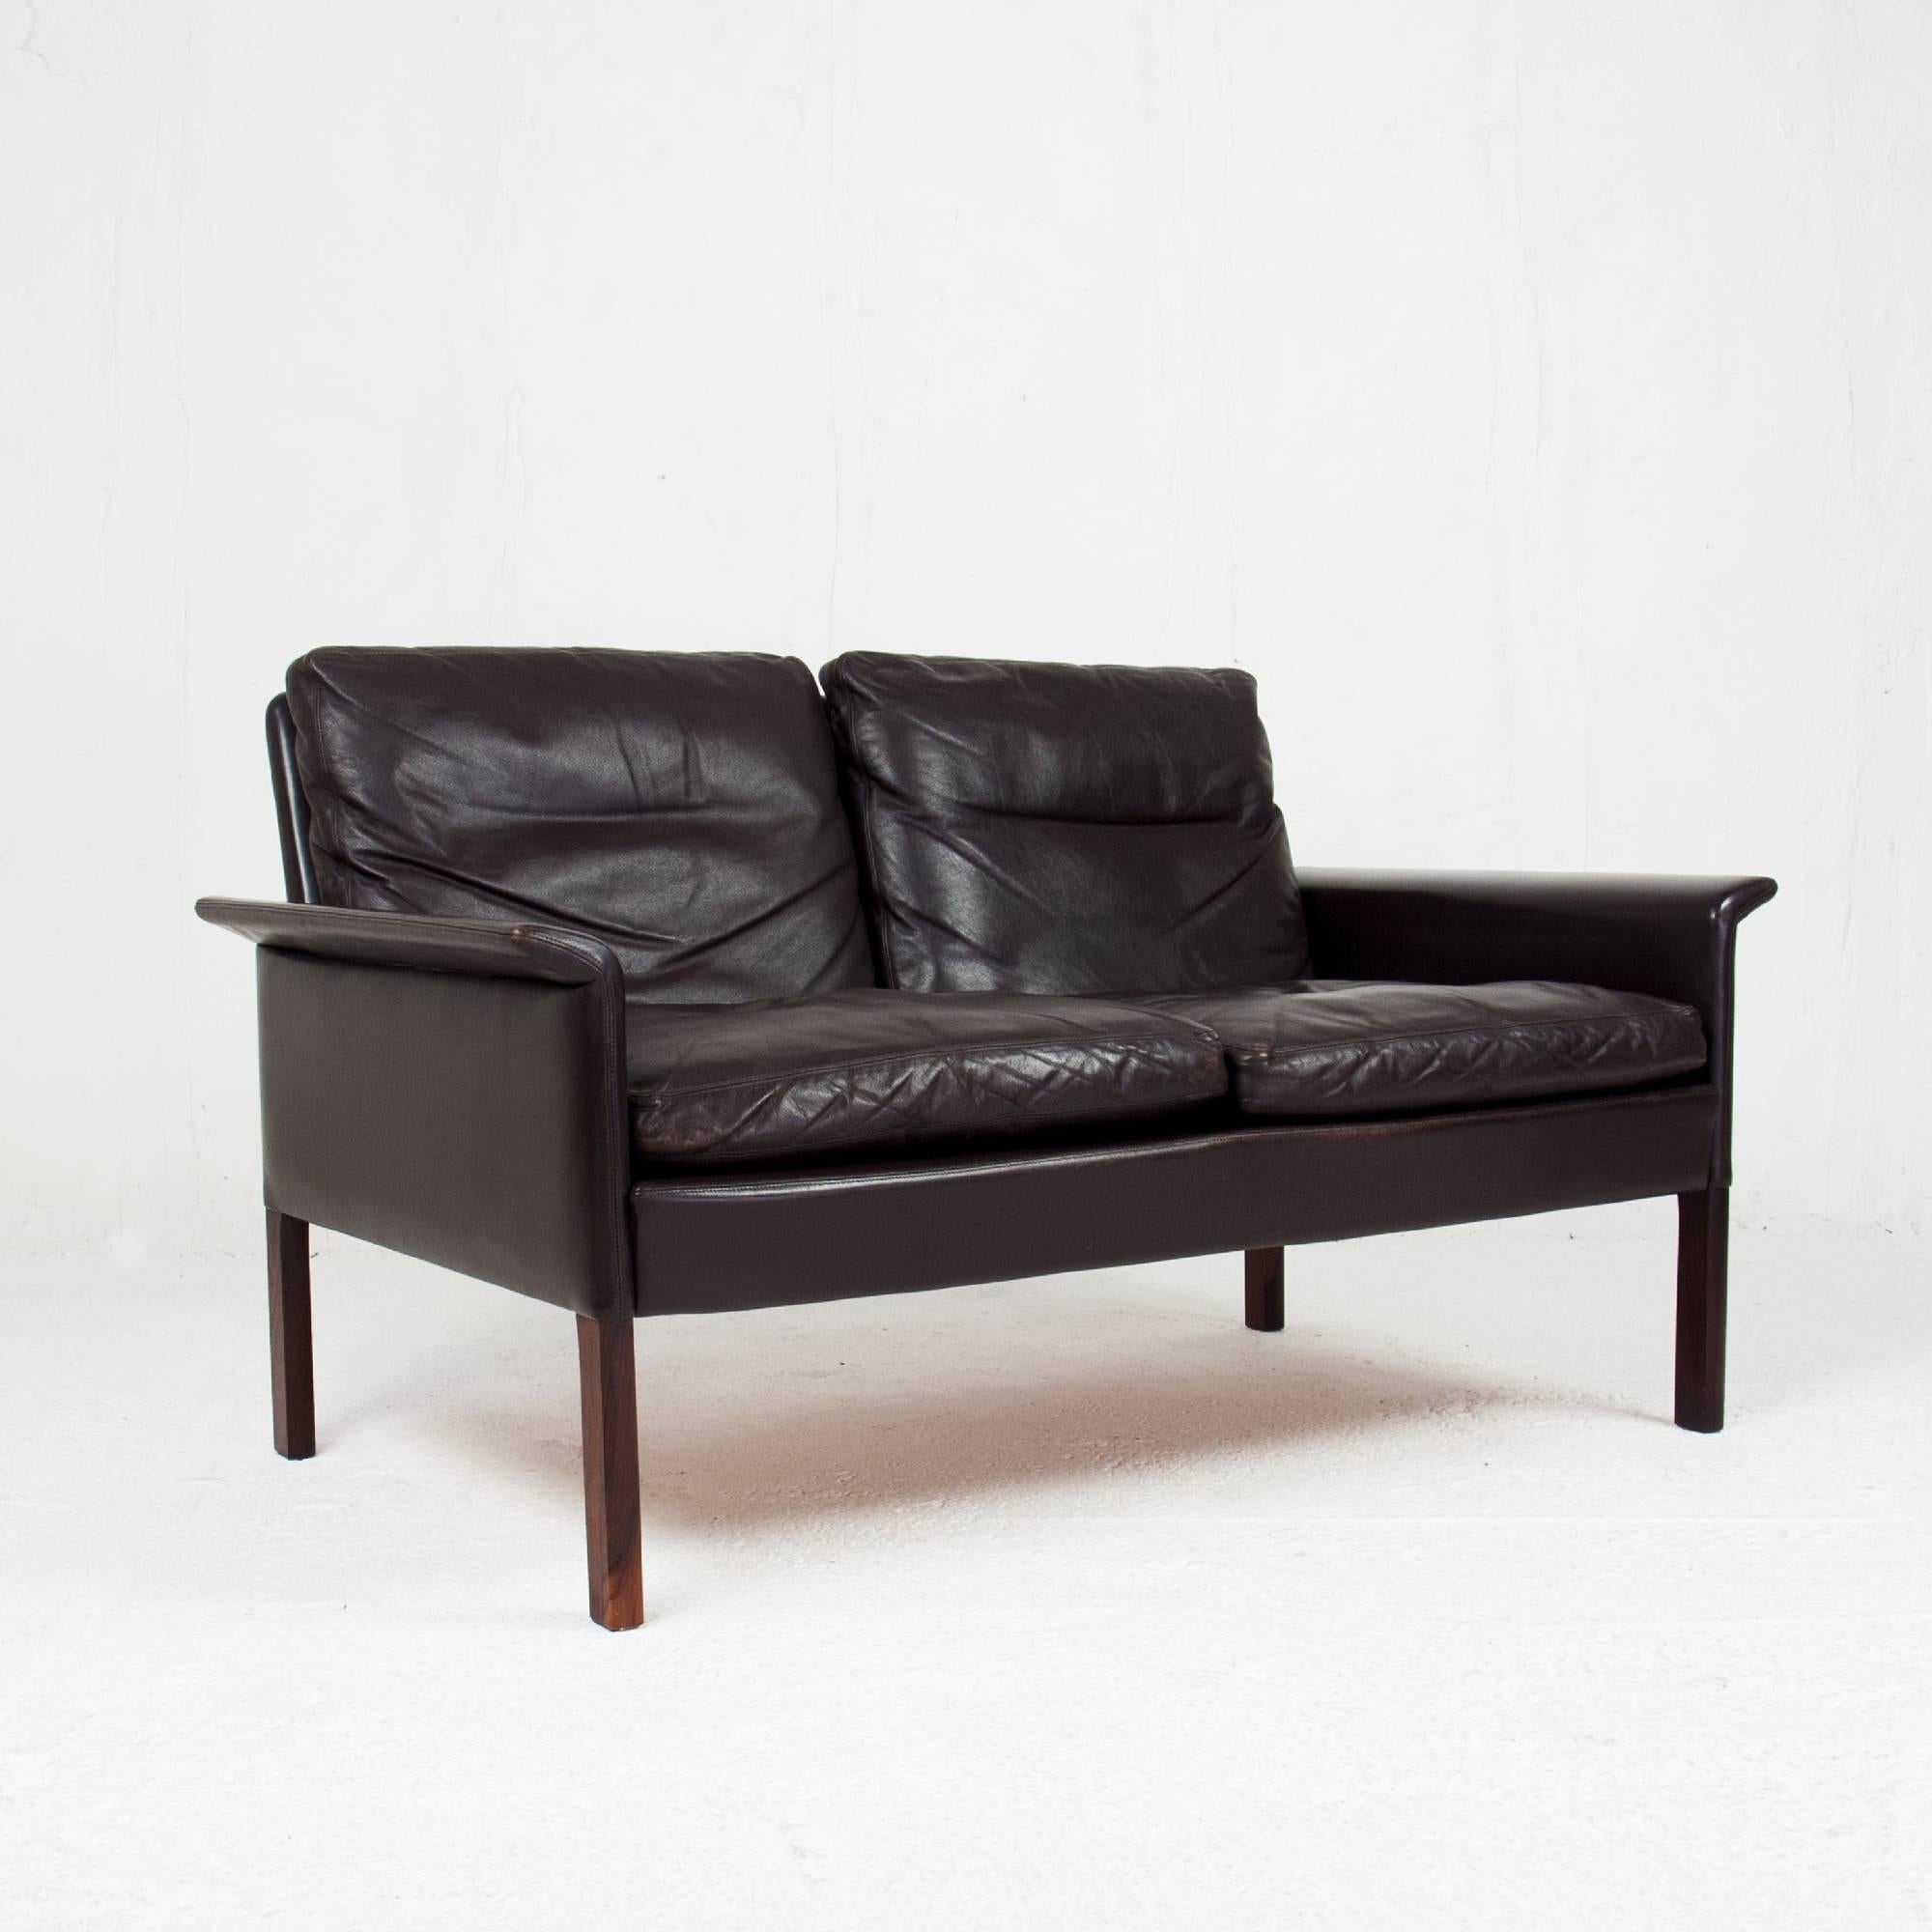 Tow-seat Danish sofa designed by Hans Olsen for C/S Mobler in 1969.
Very good condition and original chocolate leather upholstery with beautiful patina. Rosewood leg and feather cushion.
Identified and listed by the Danish Museum of Art and